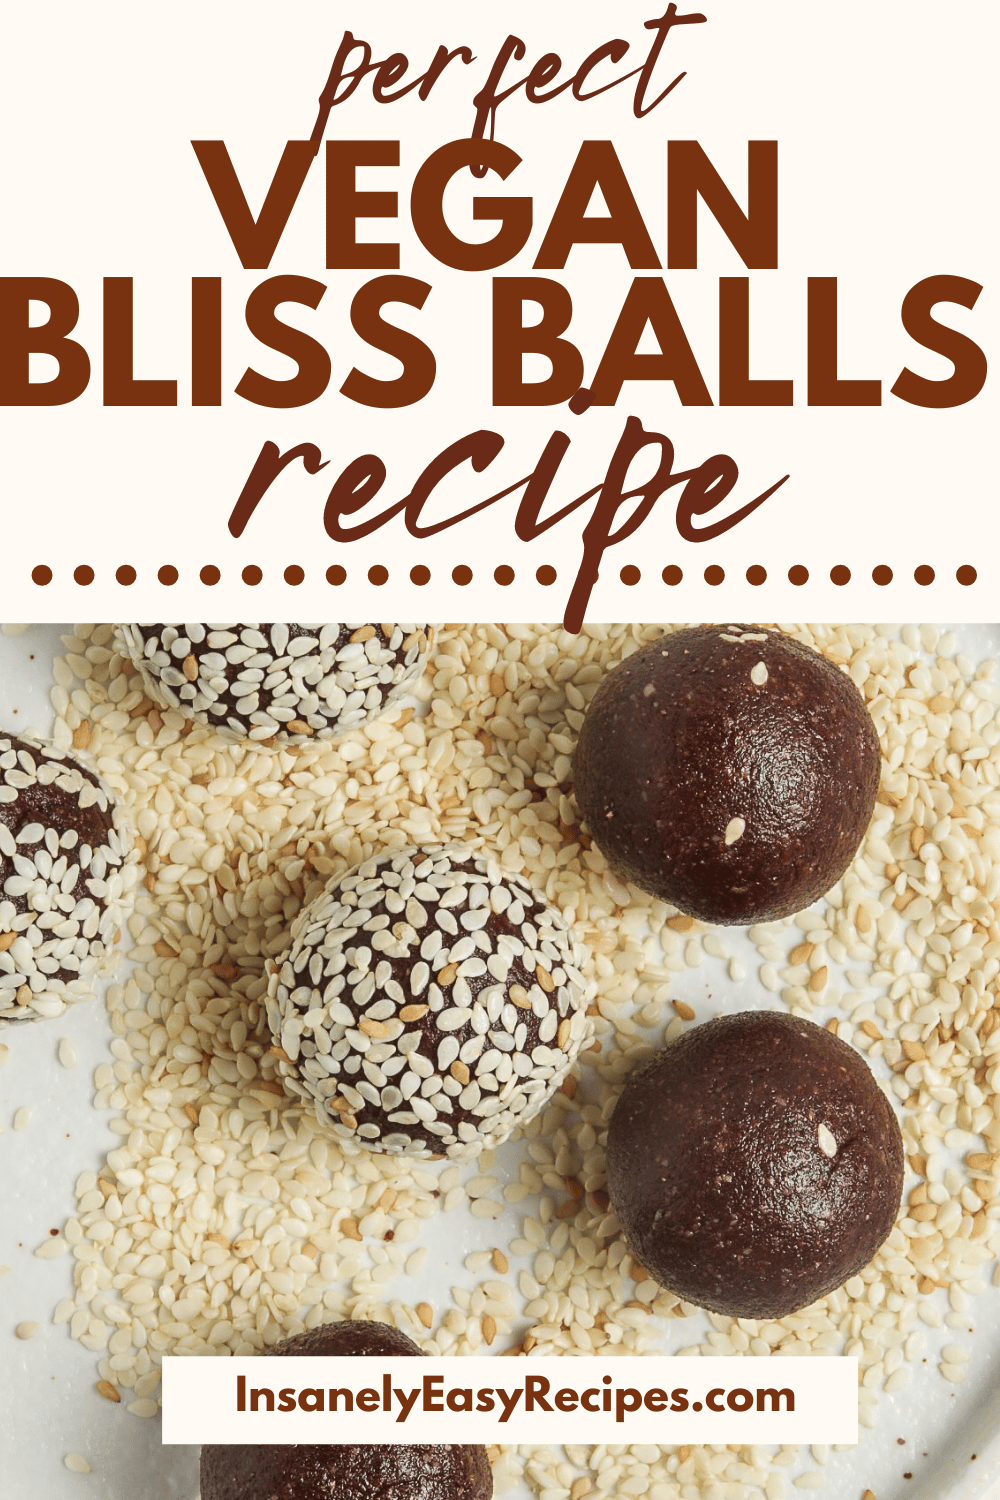 pinterest photo of a closeup shot of bliss balls, some coated in sesame seeds, some uncoated